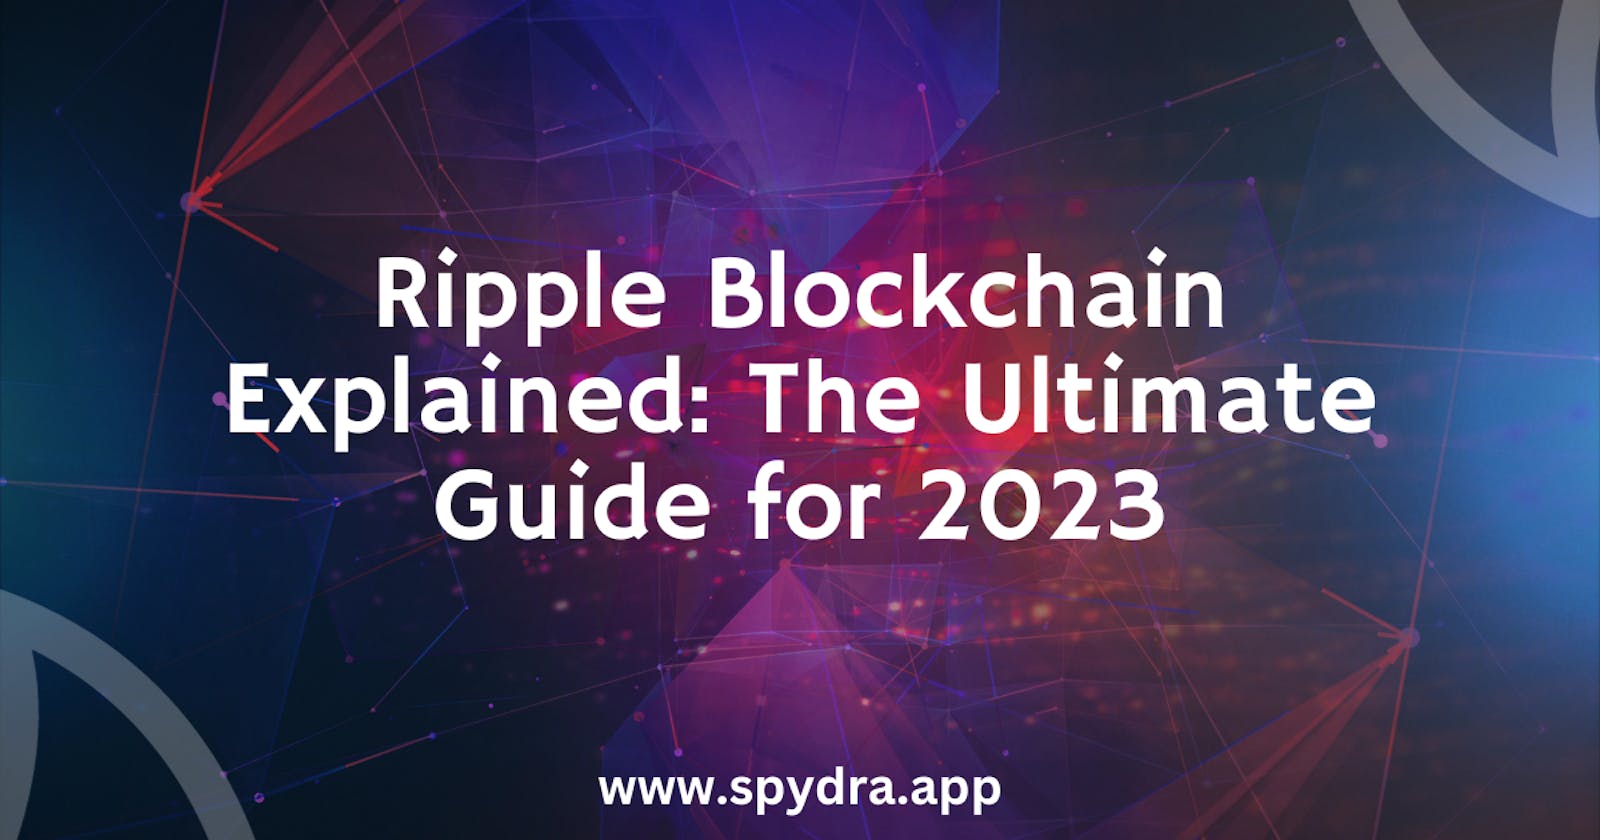 Ripple Blockchain Explained: The Ultimate Guide for 2023